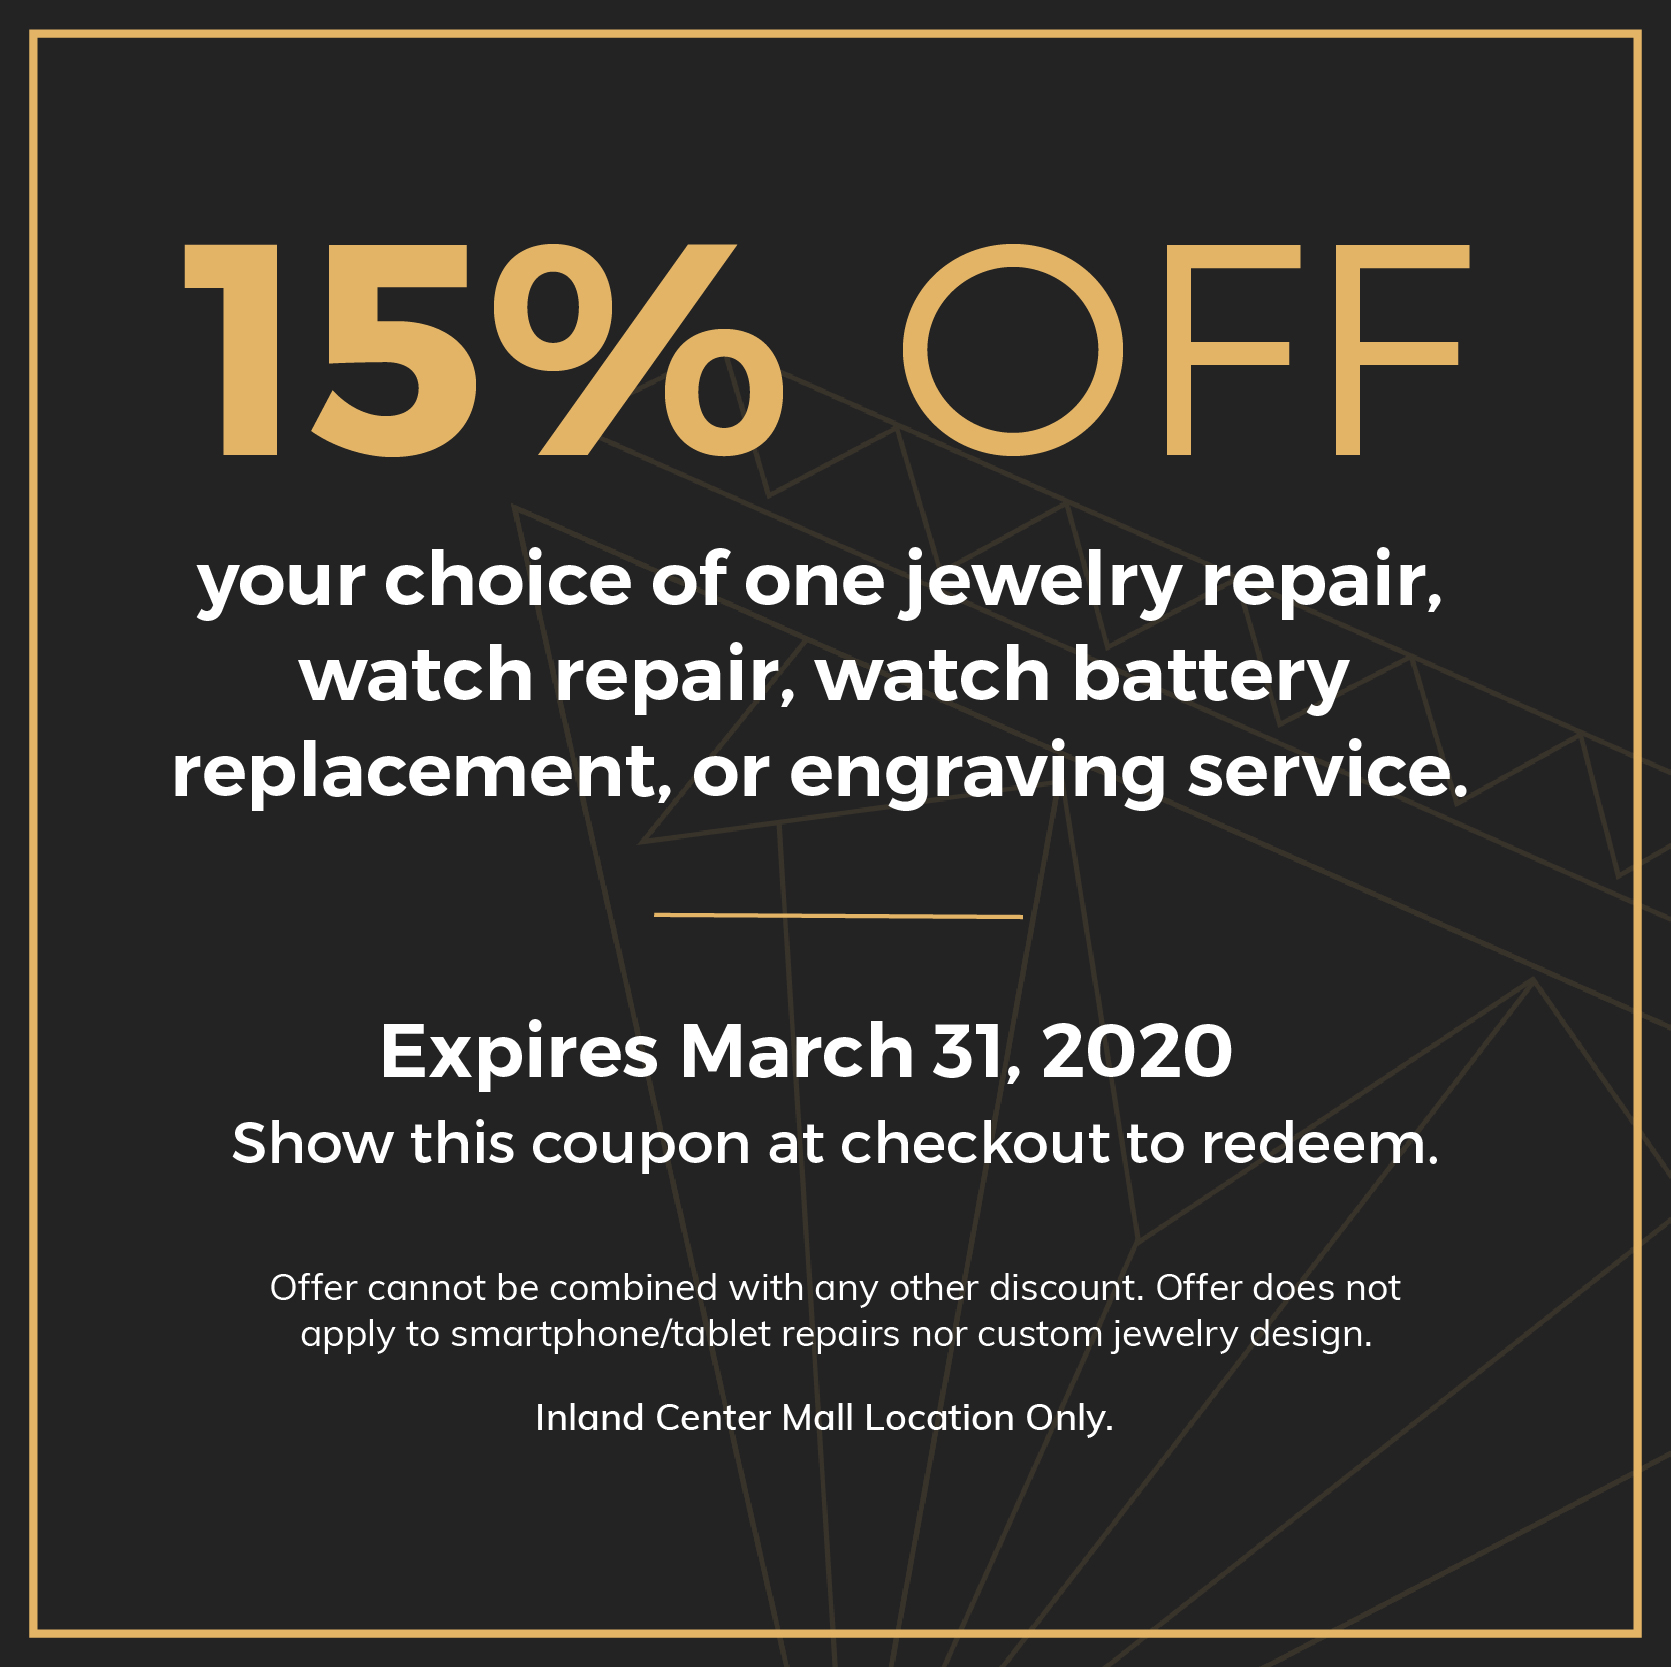 Inland Center Mall | Fast-Fix Jewelry and Watch Repairs